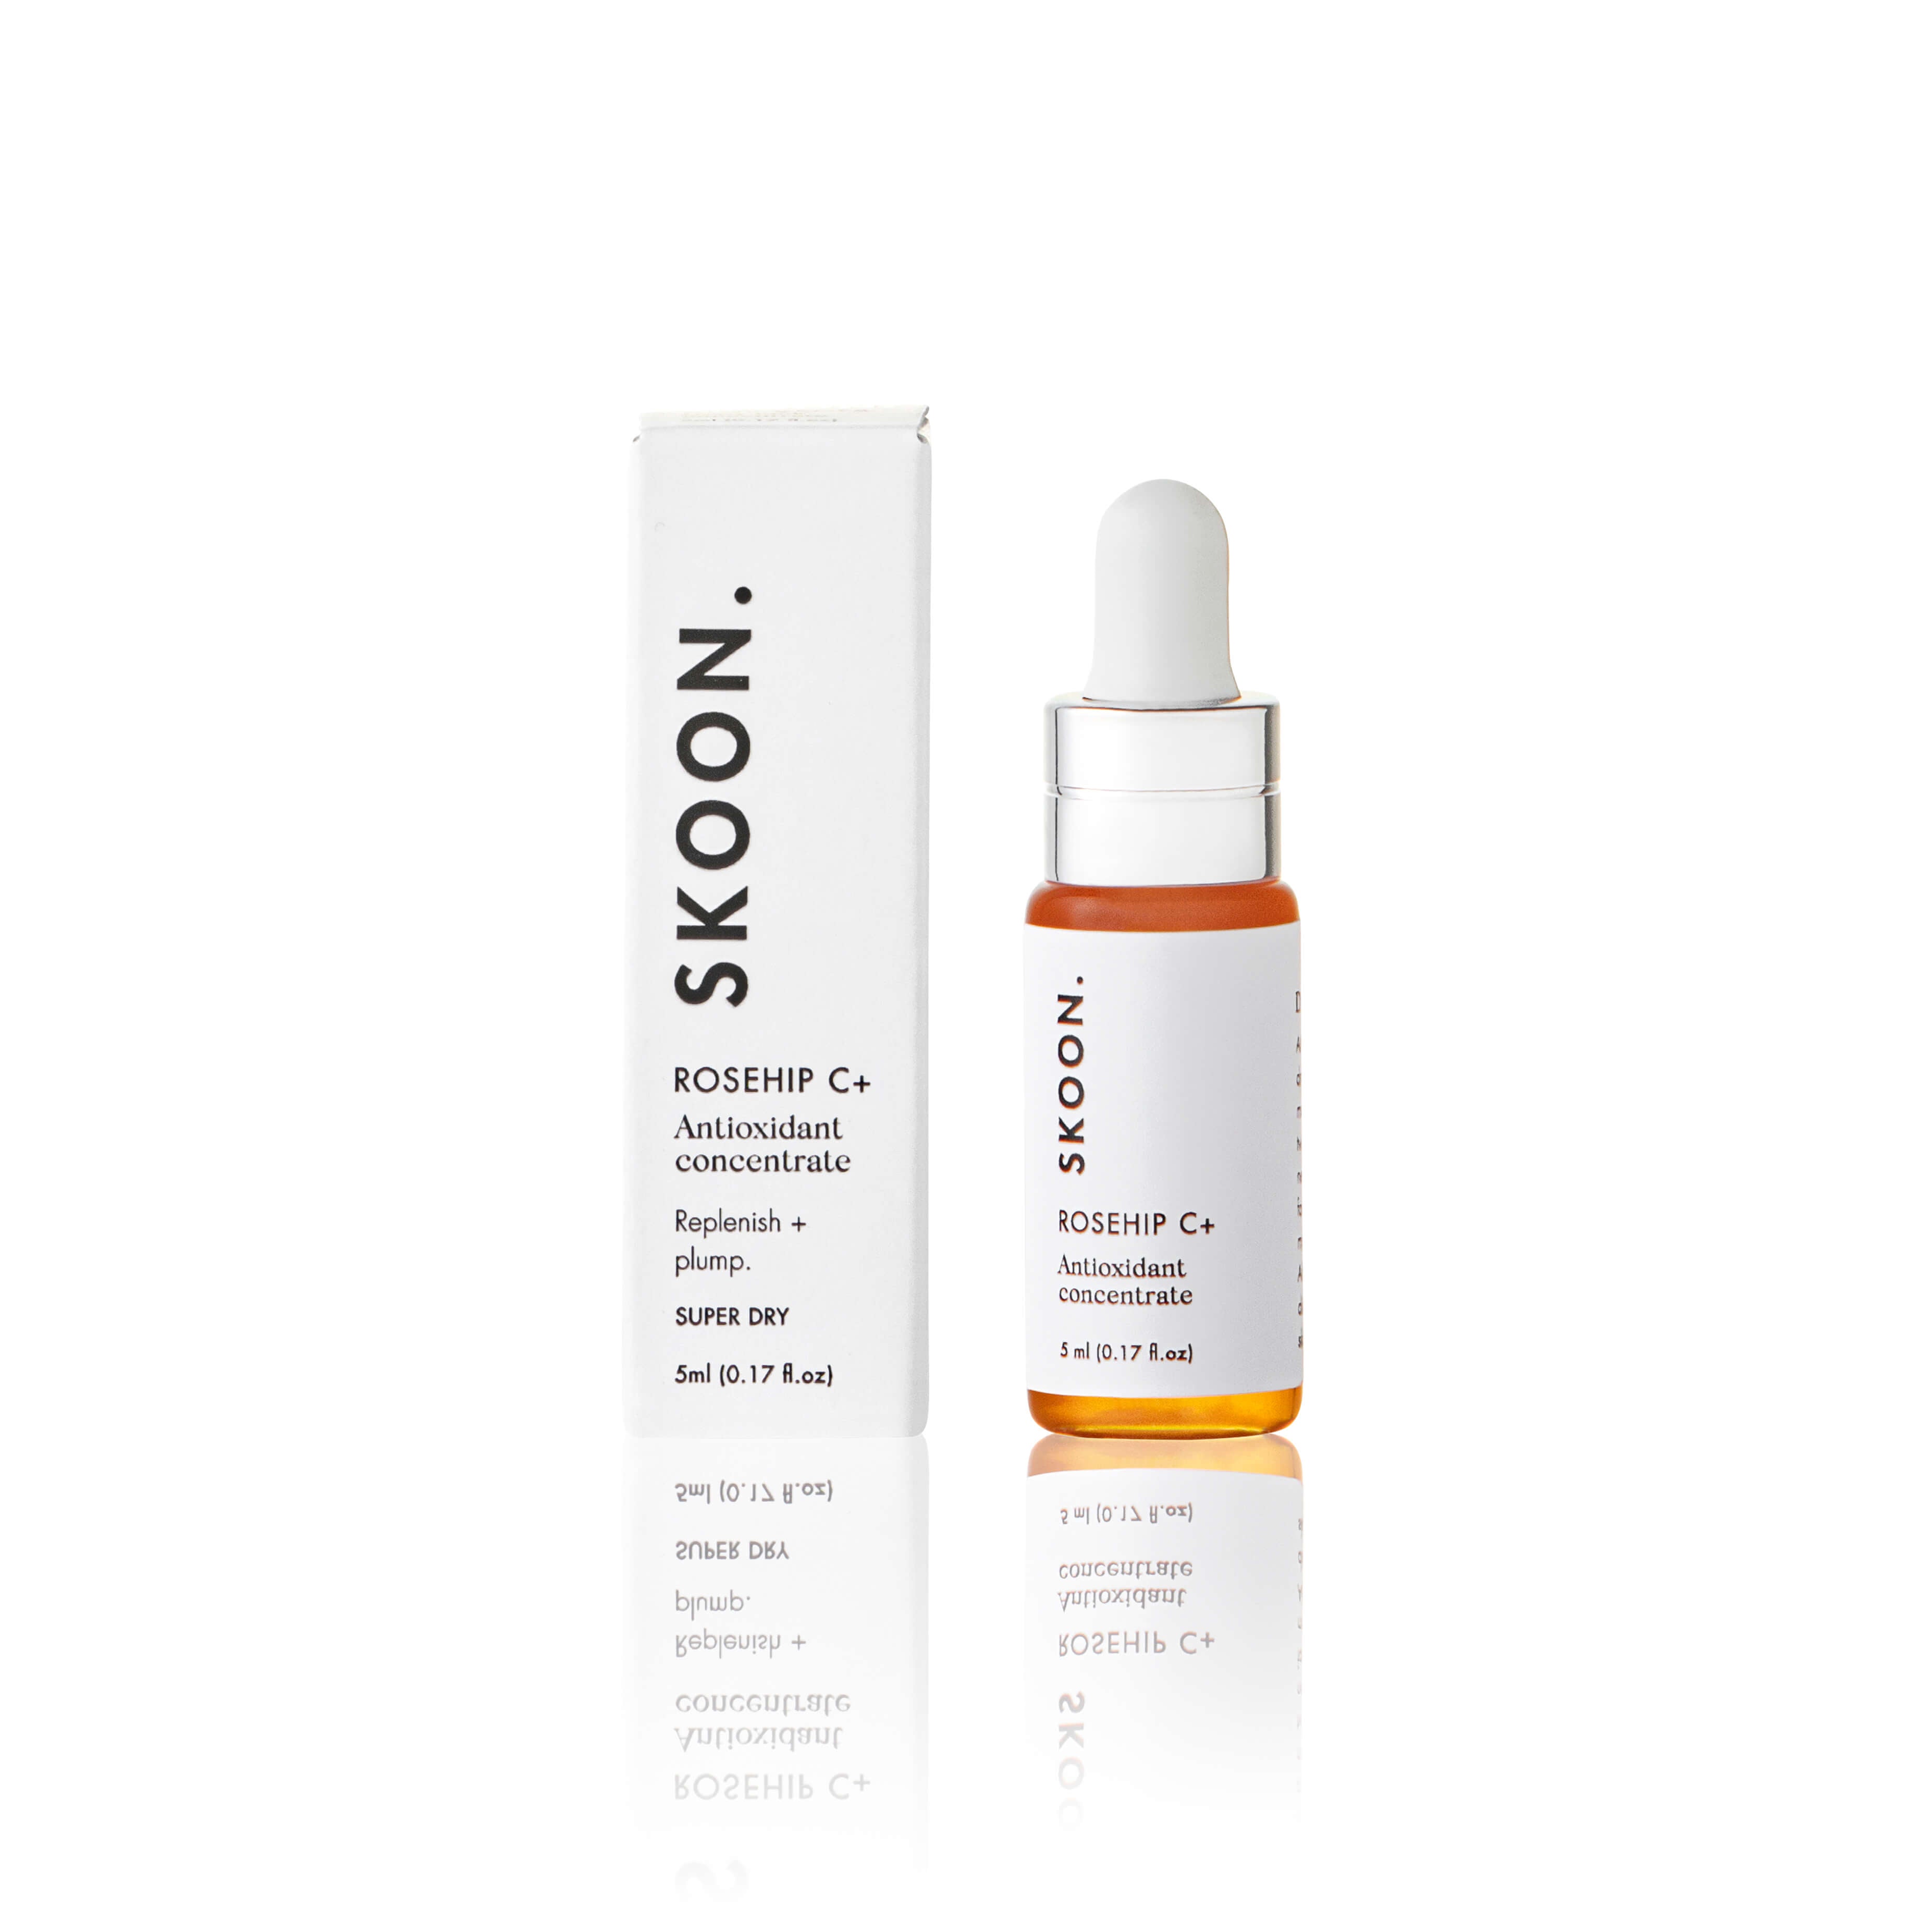 SKOON. ROSEHIP C+ Antioxidant concentrate